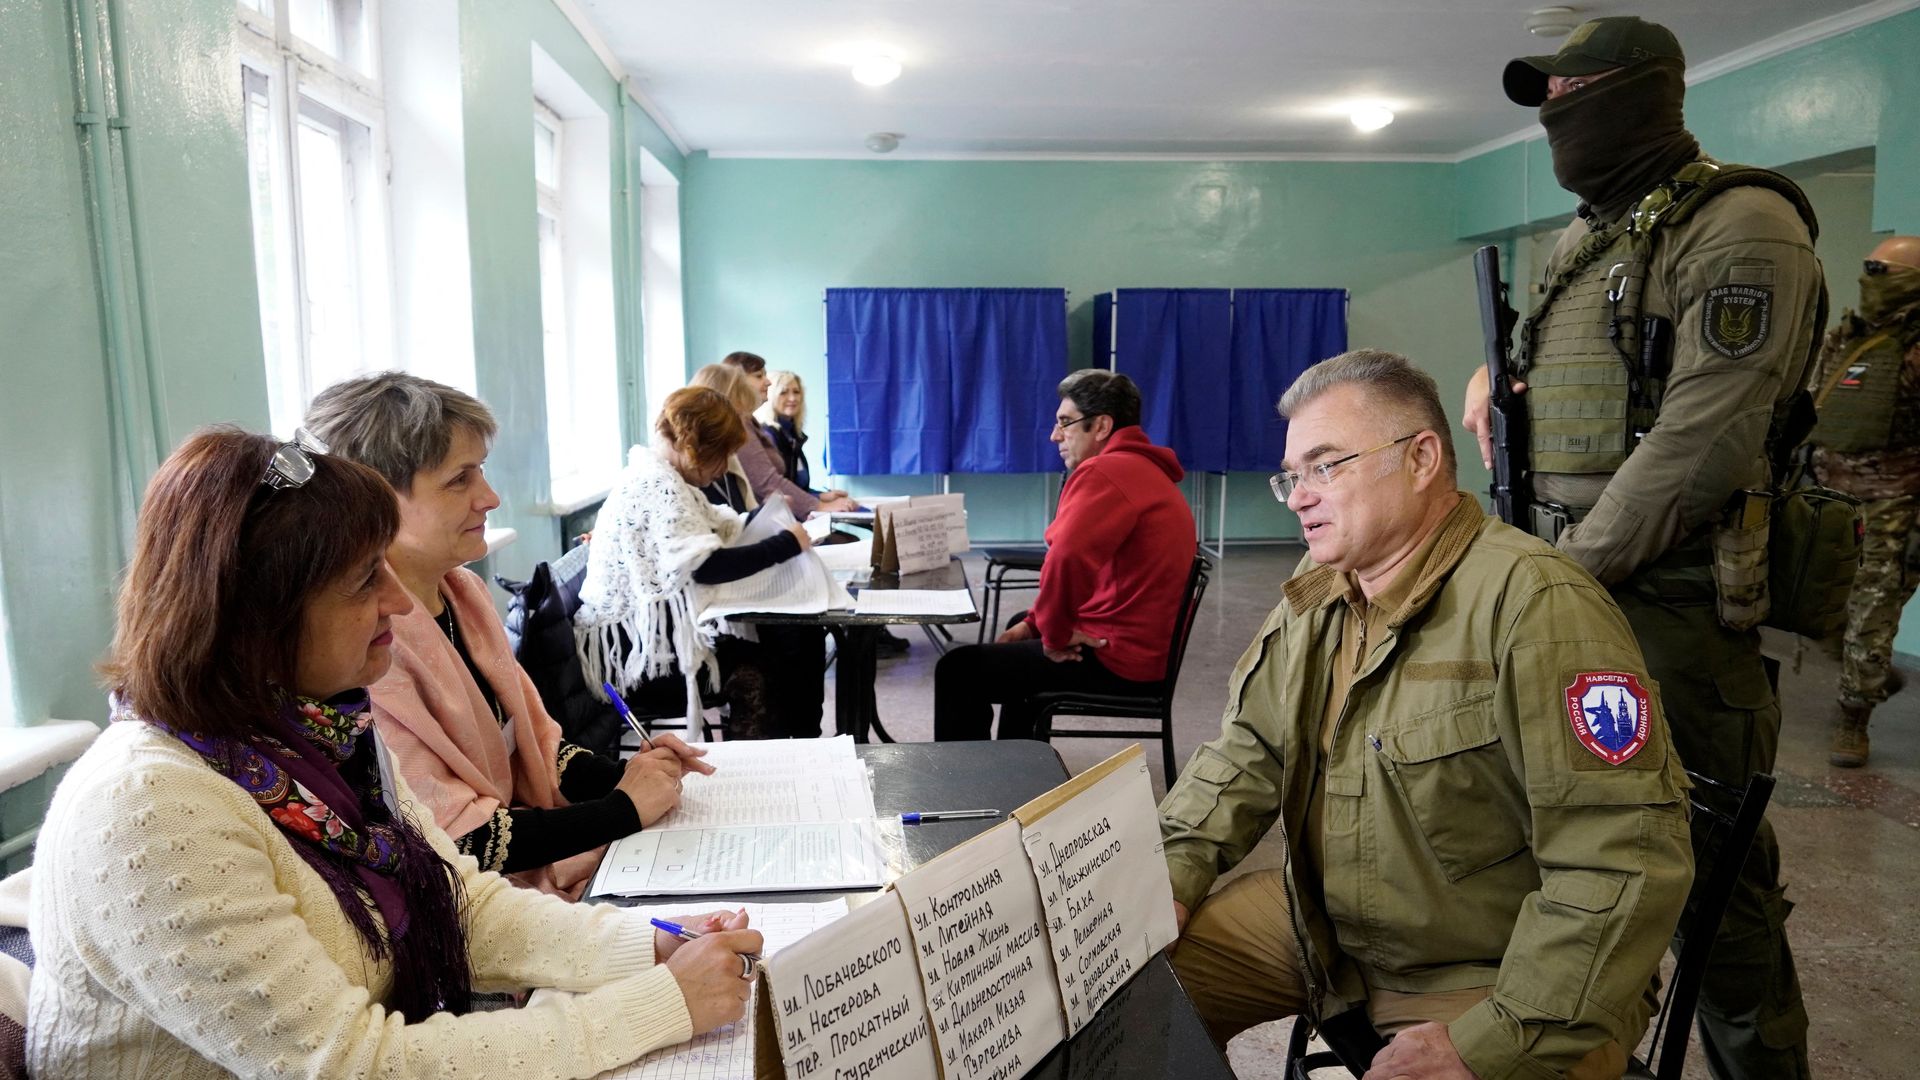 Konstantin Ivashchenko (3R), former CEO of the Azovmash plant and appointed pro-Russian mayor of Mariupol, visits a polling station as people vote in a referendum in Mariupol on September 27, 2022. -